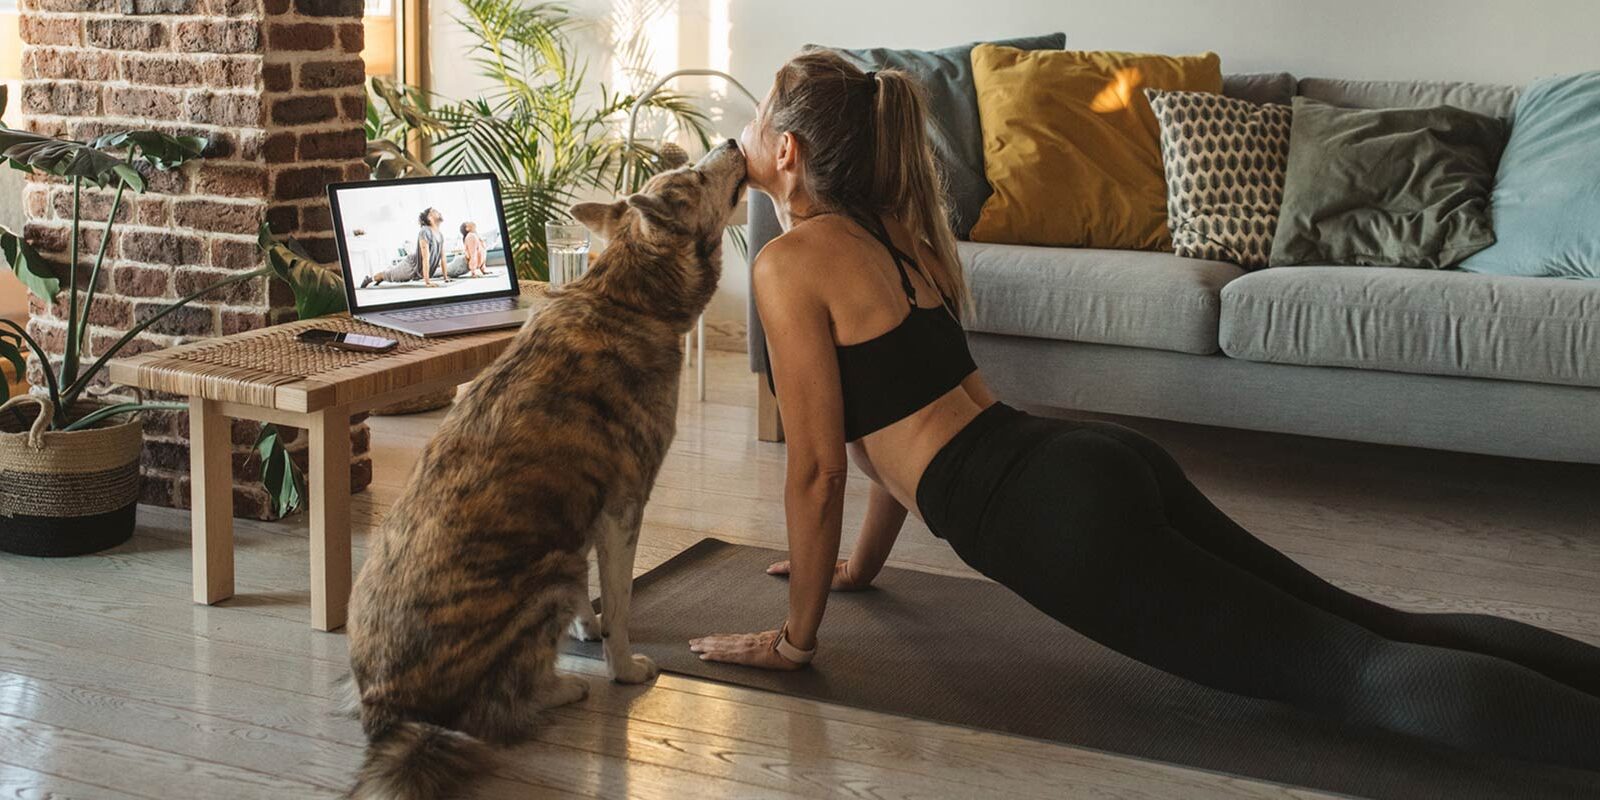 17 Extremely Effective Apartment Workouts That You Can Do in Small Spaces